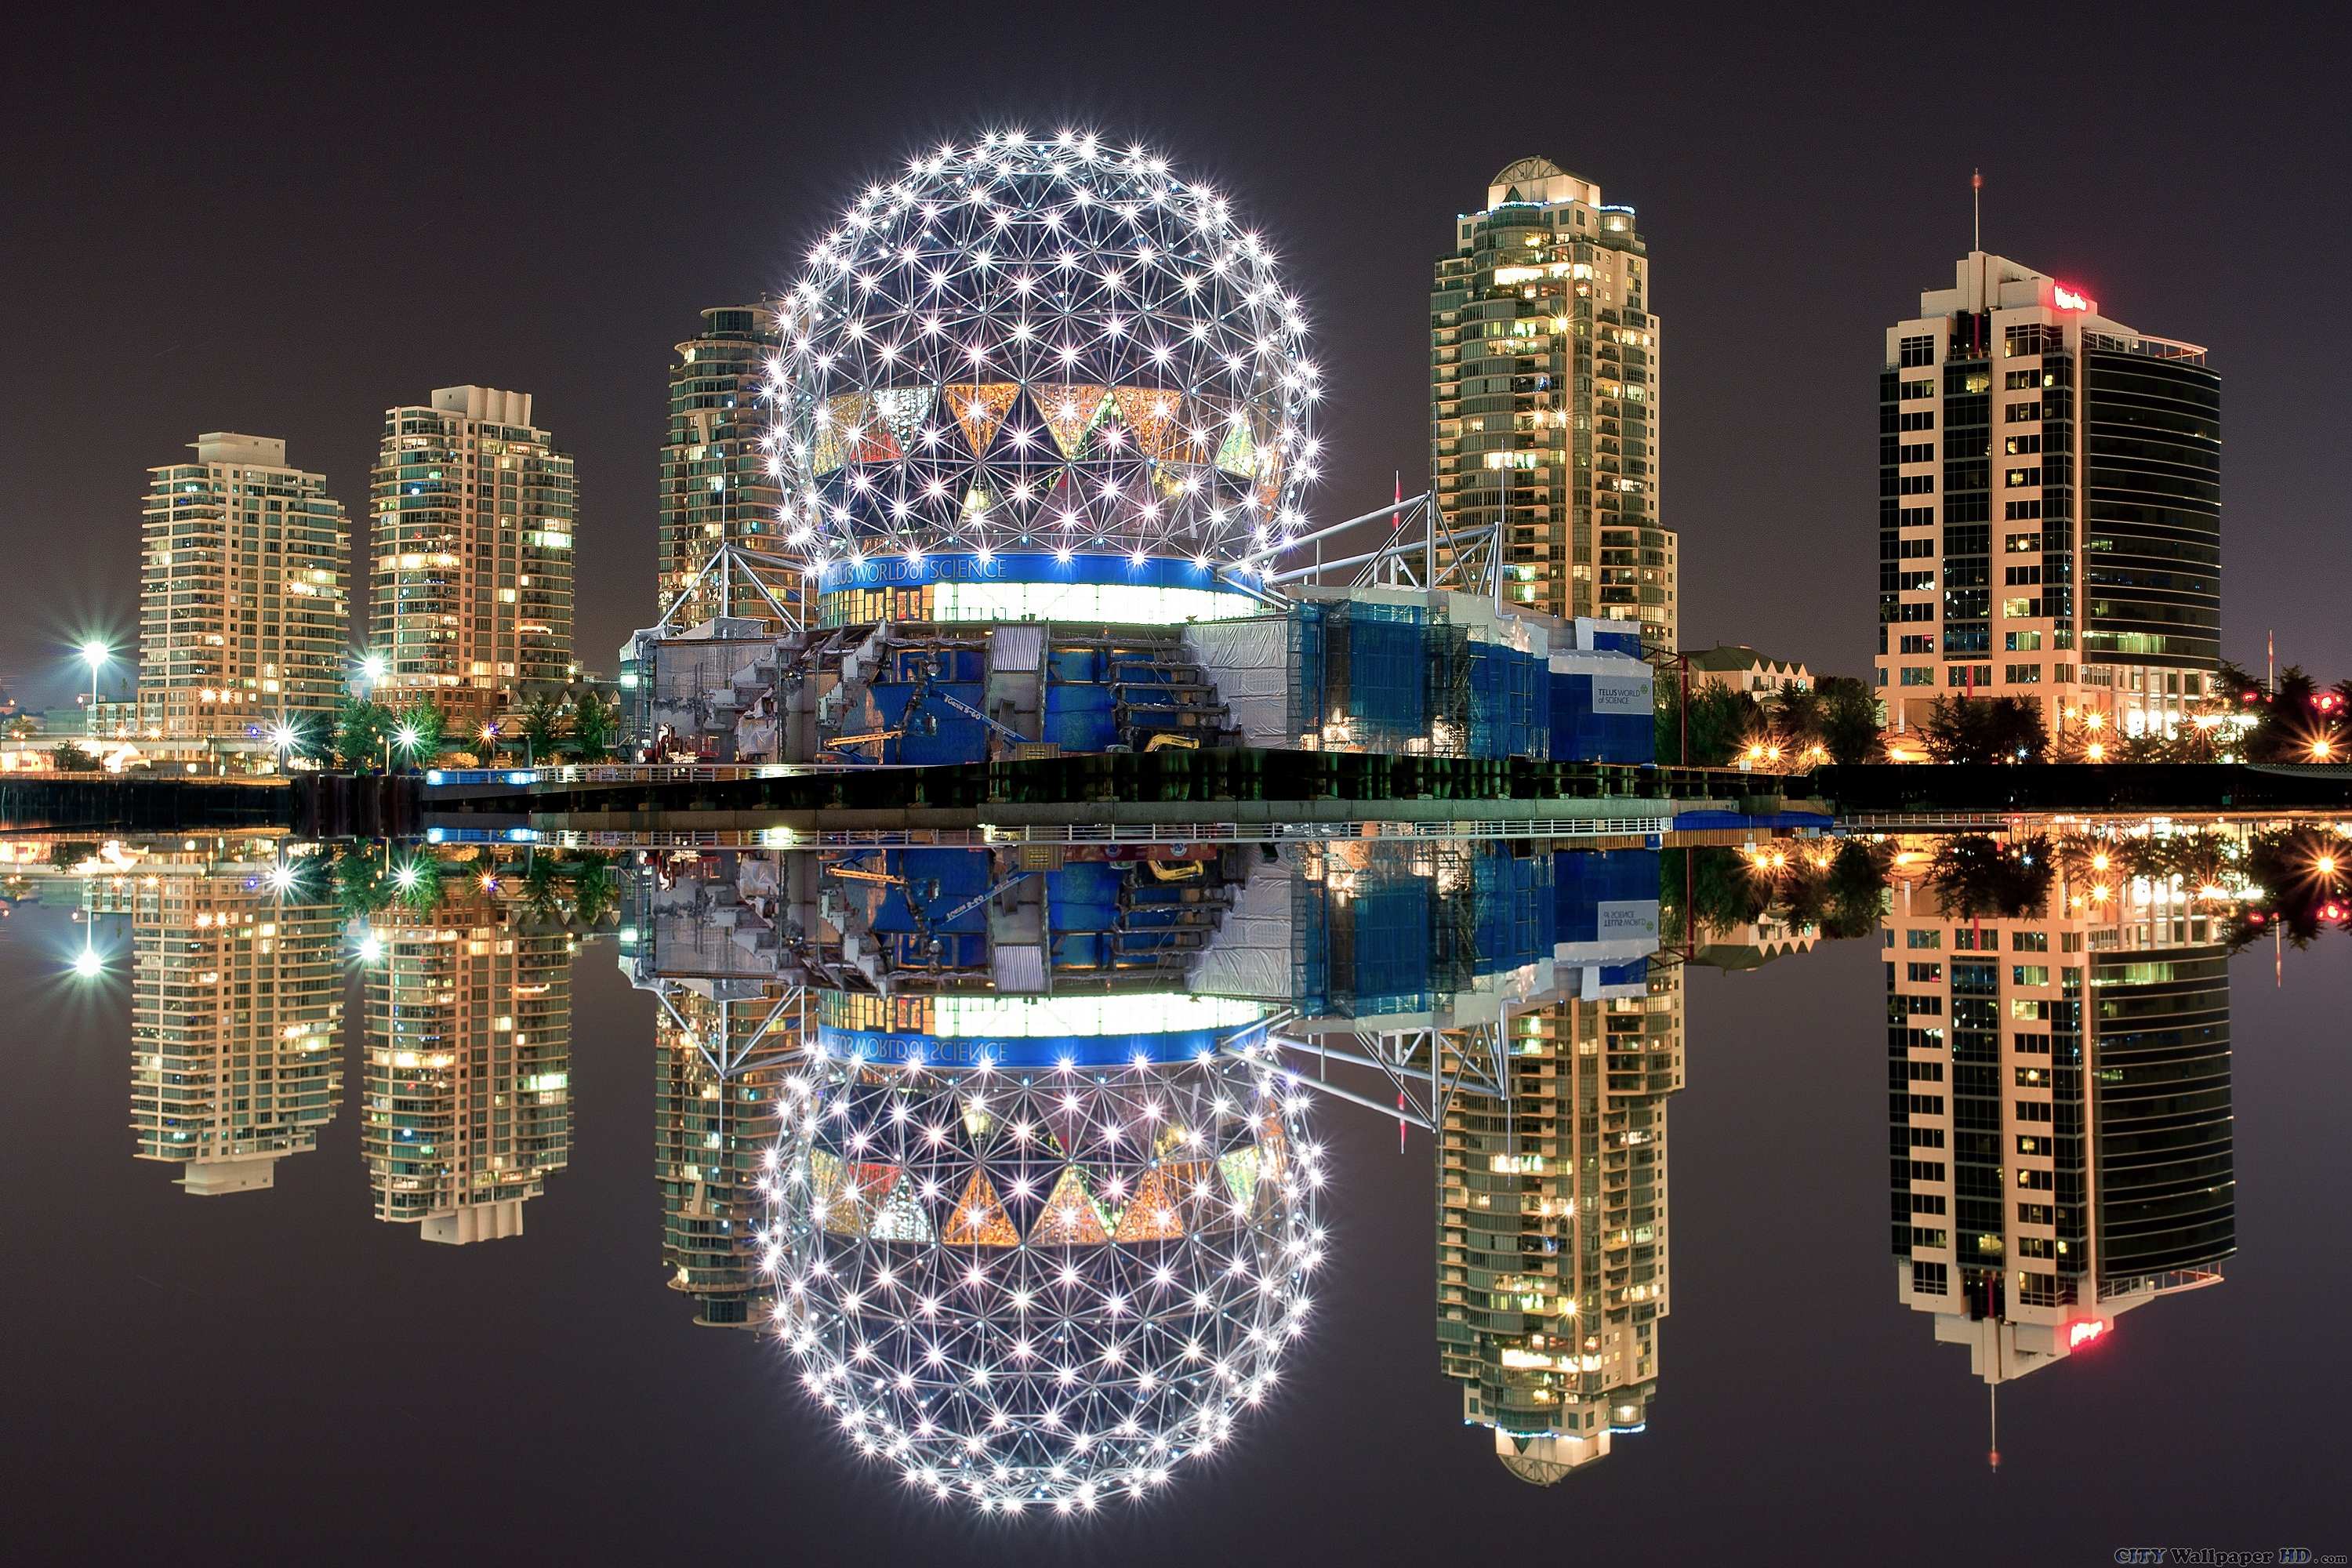 Vancouver wallpaper. Background cities for PC. Vancouver, Canada, buildings, night, lights, reflection, water